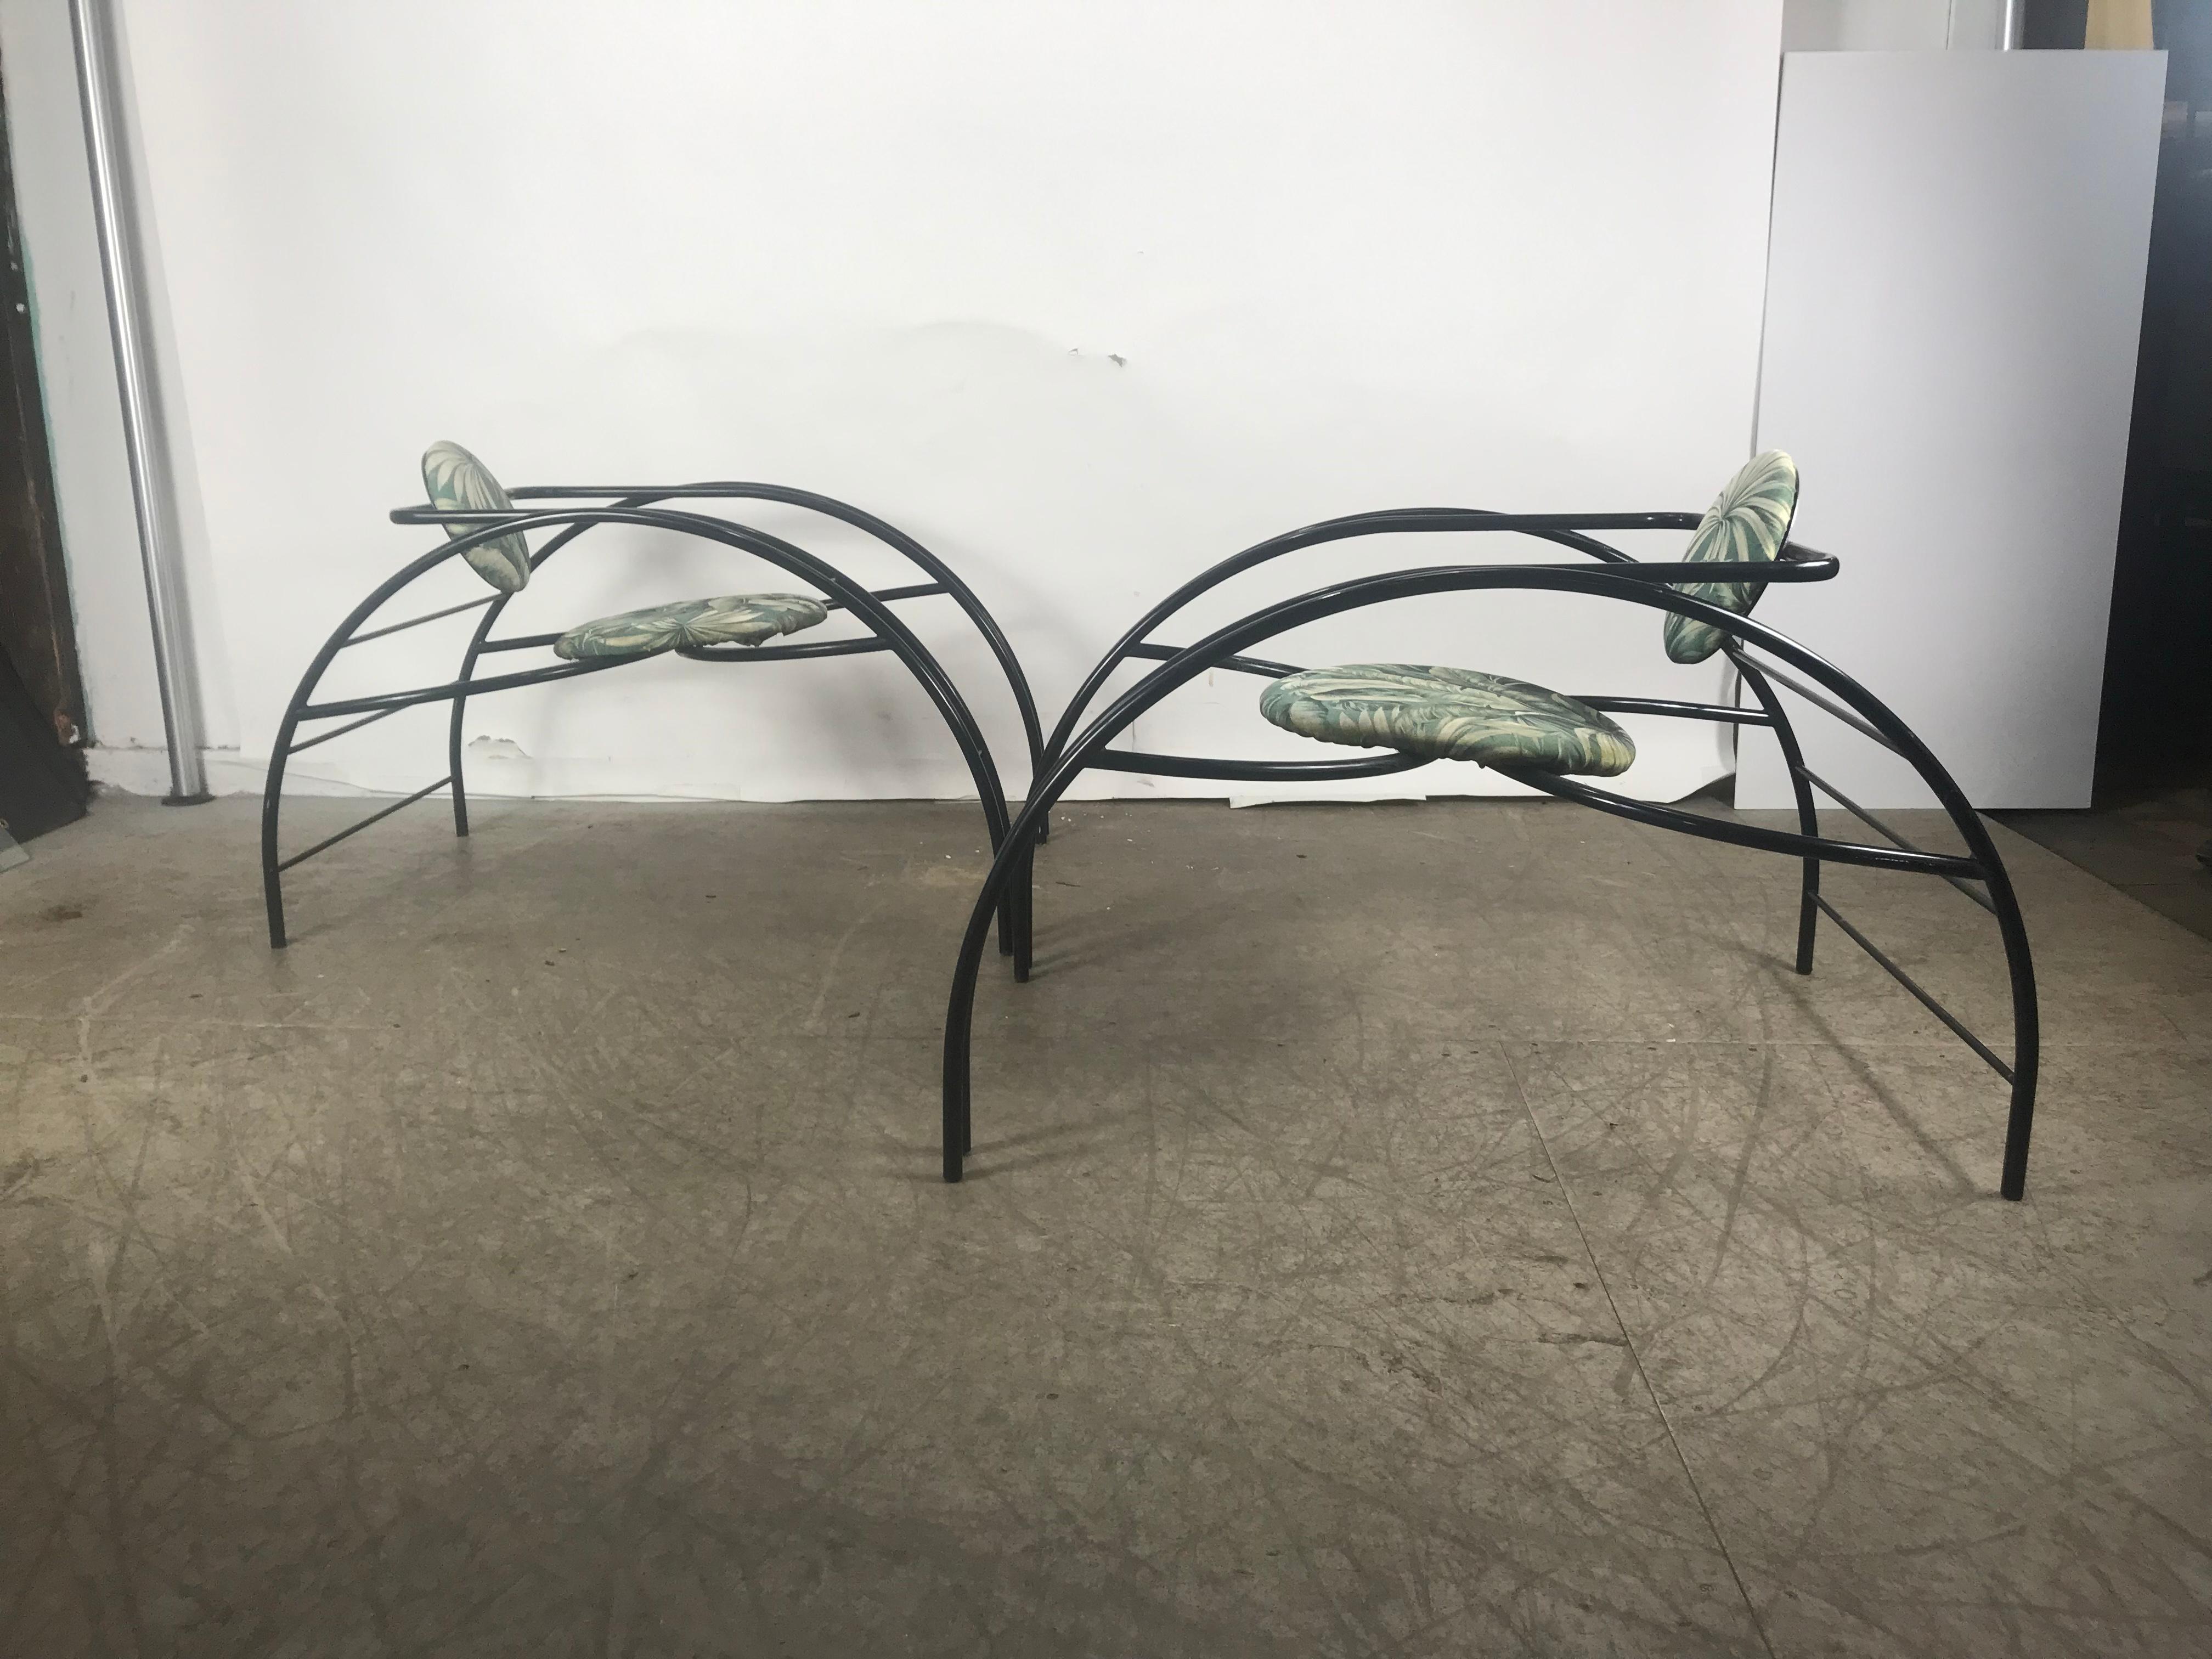 Post-Modern Quebec 69 Spider Chairs, Les Amisco Memphis Style, Space Age